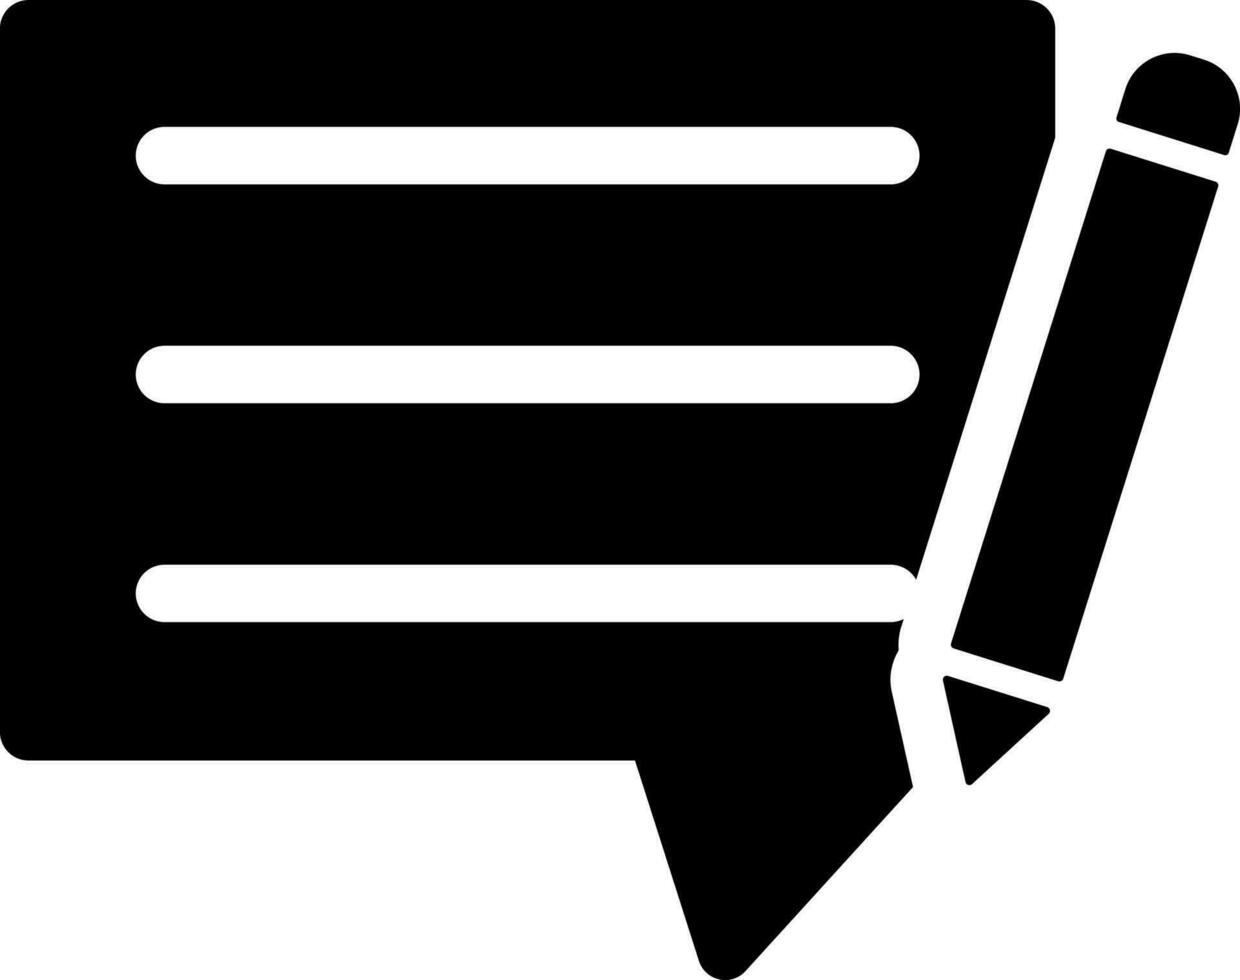 Edit comments glyph icon or symbol. vector